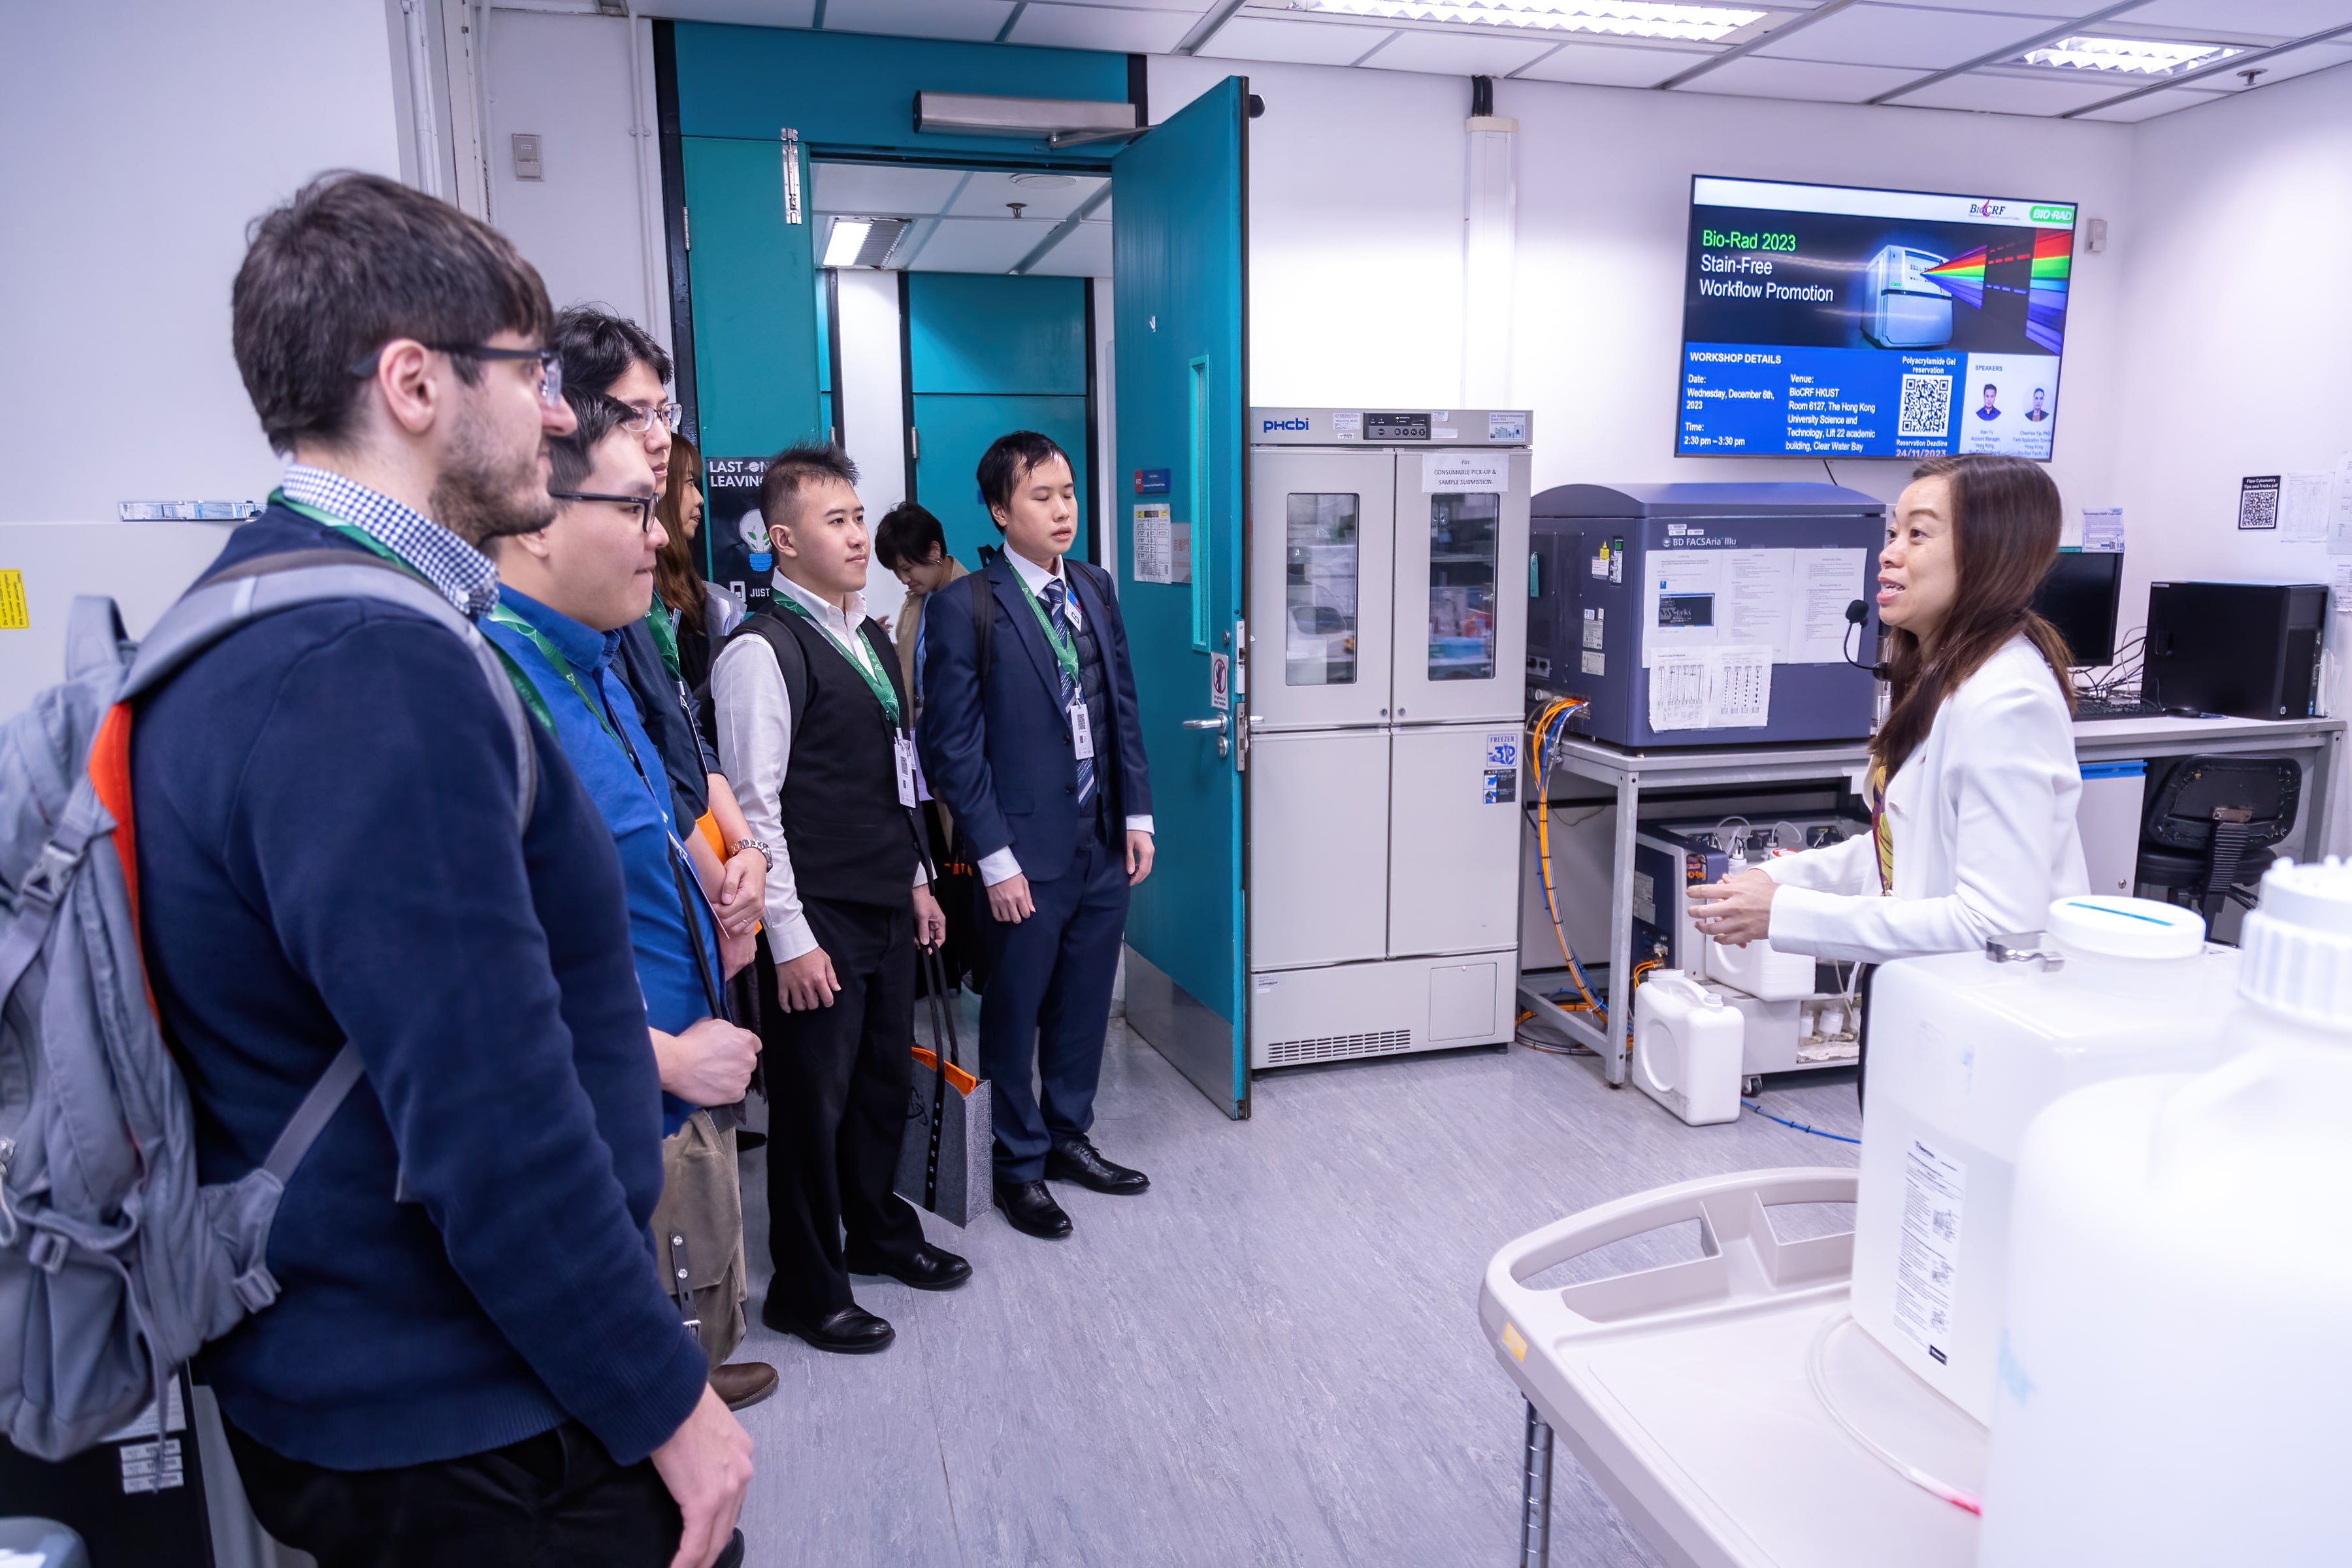 As part of the visit, young scientists had the opportunity to explore the Biosciences Central Research Facility and learn about its cutting-edge technology.